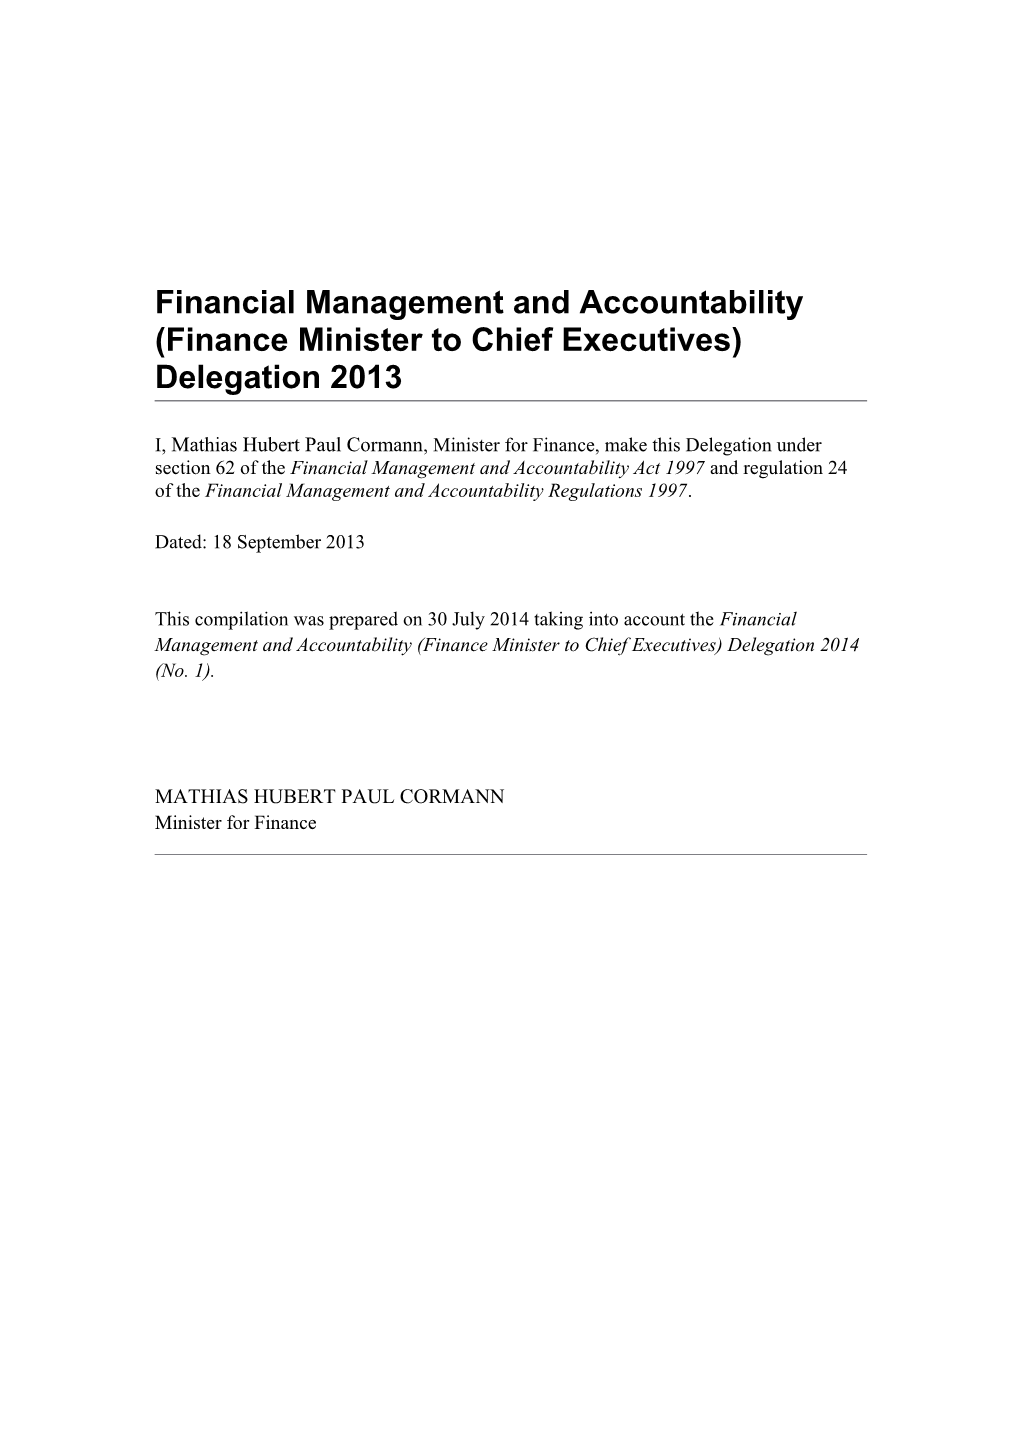 Financial Management and Accountability (Finance Minister to Chief Executives) Delegation 2013